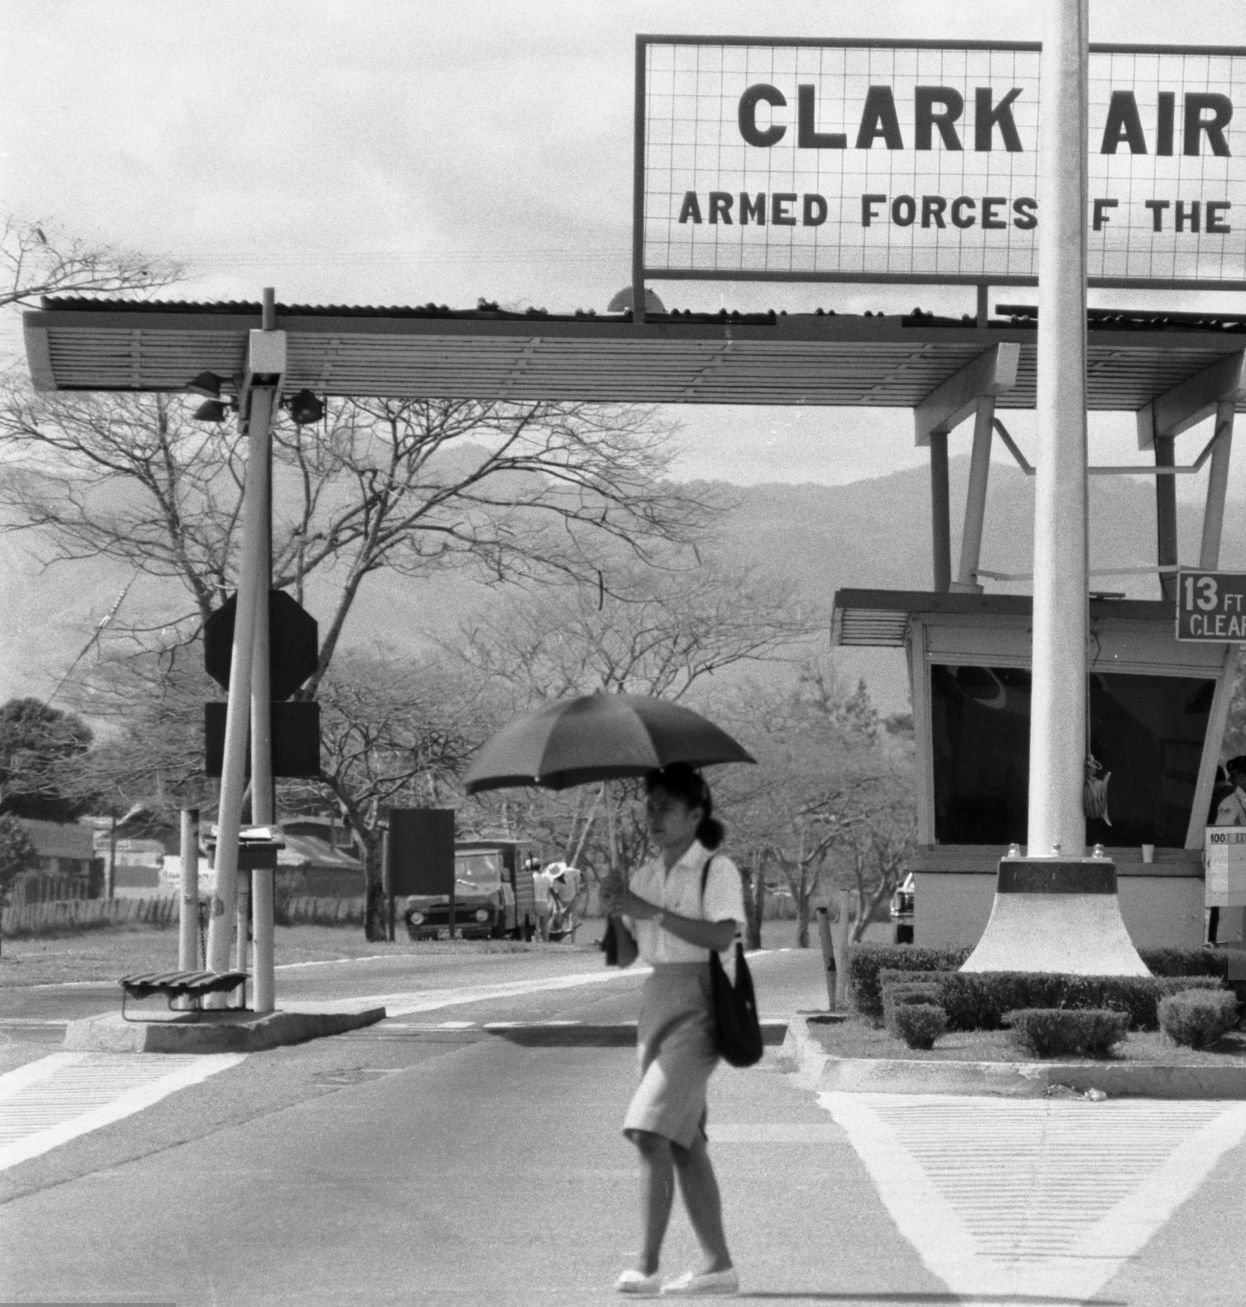 The entrance to the U.S. Clark Air Base in the Philippines, November 1987.